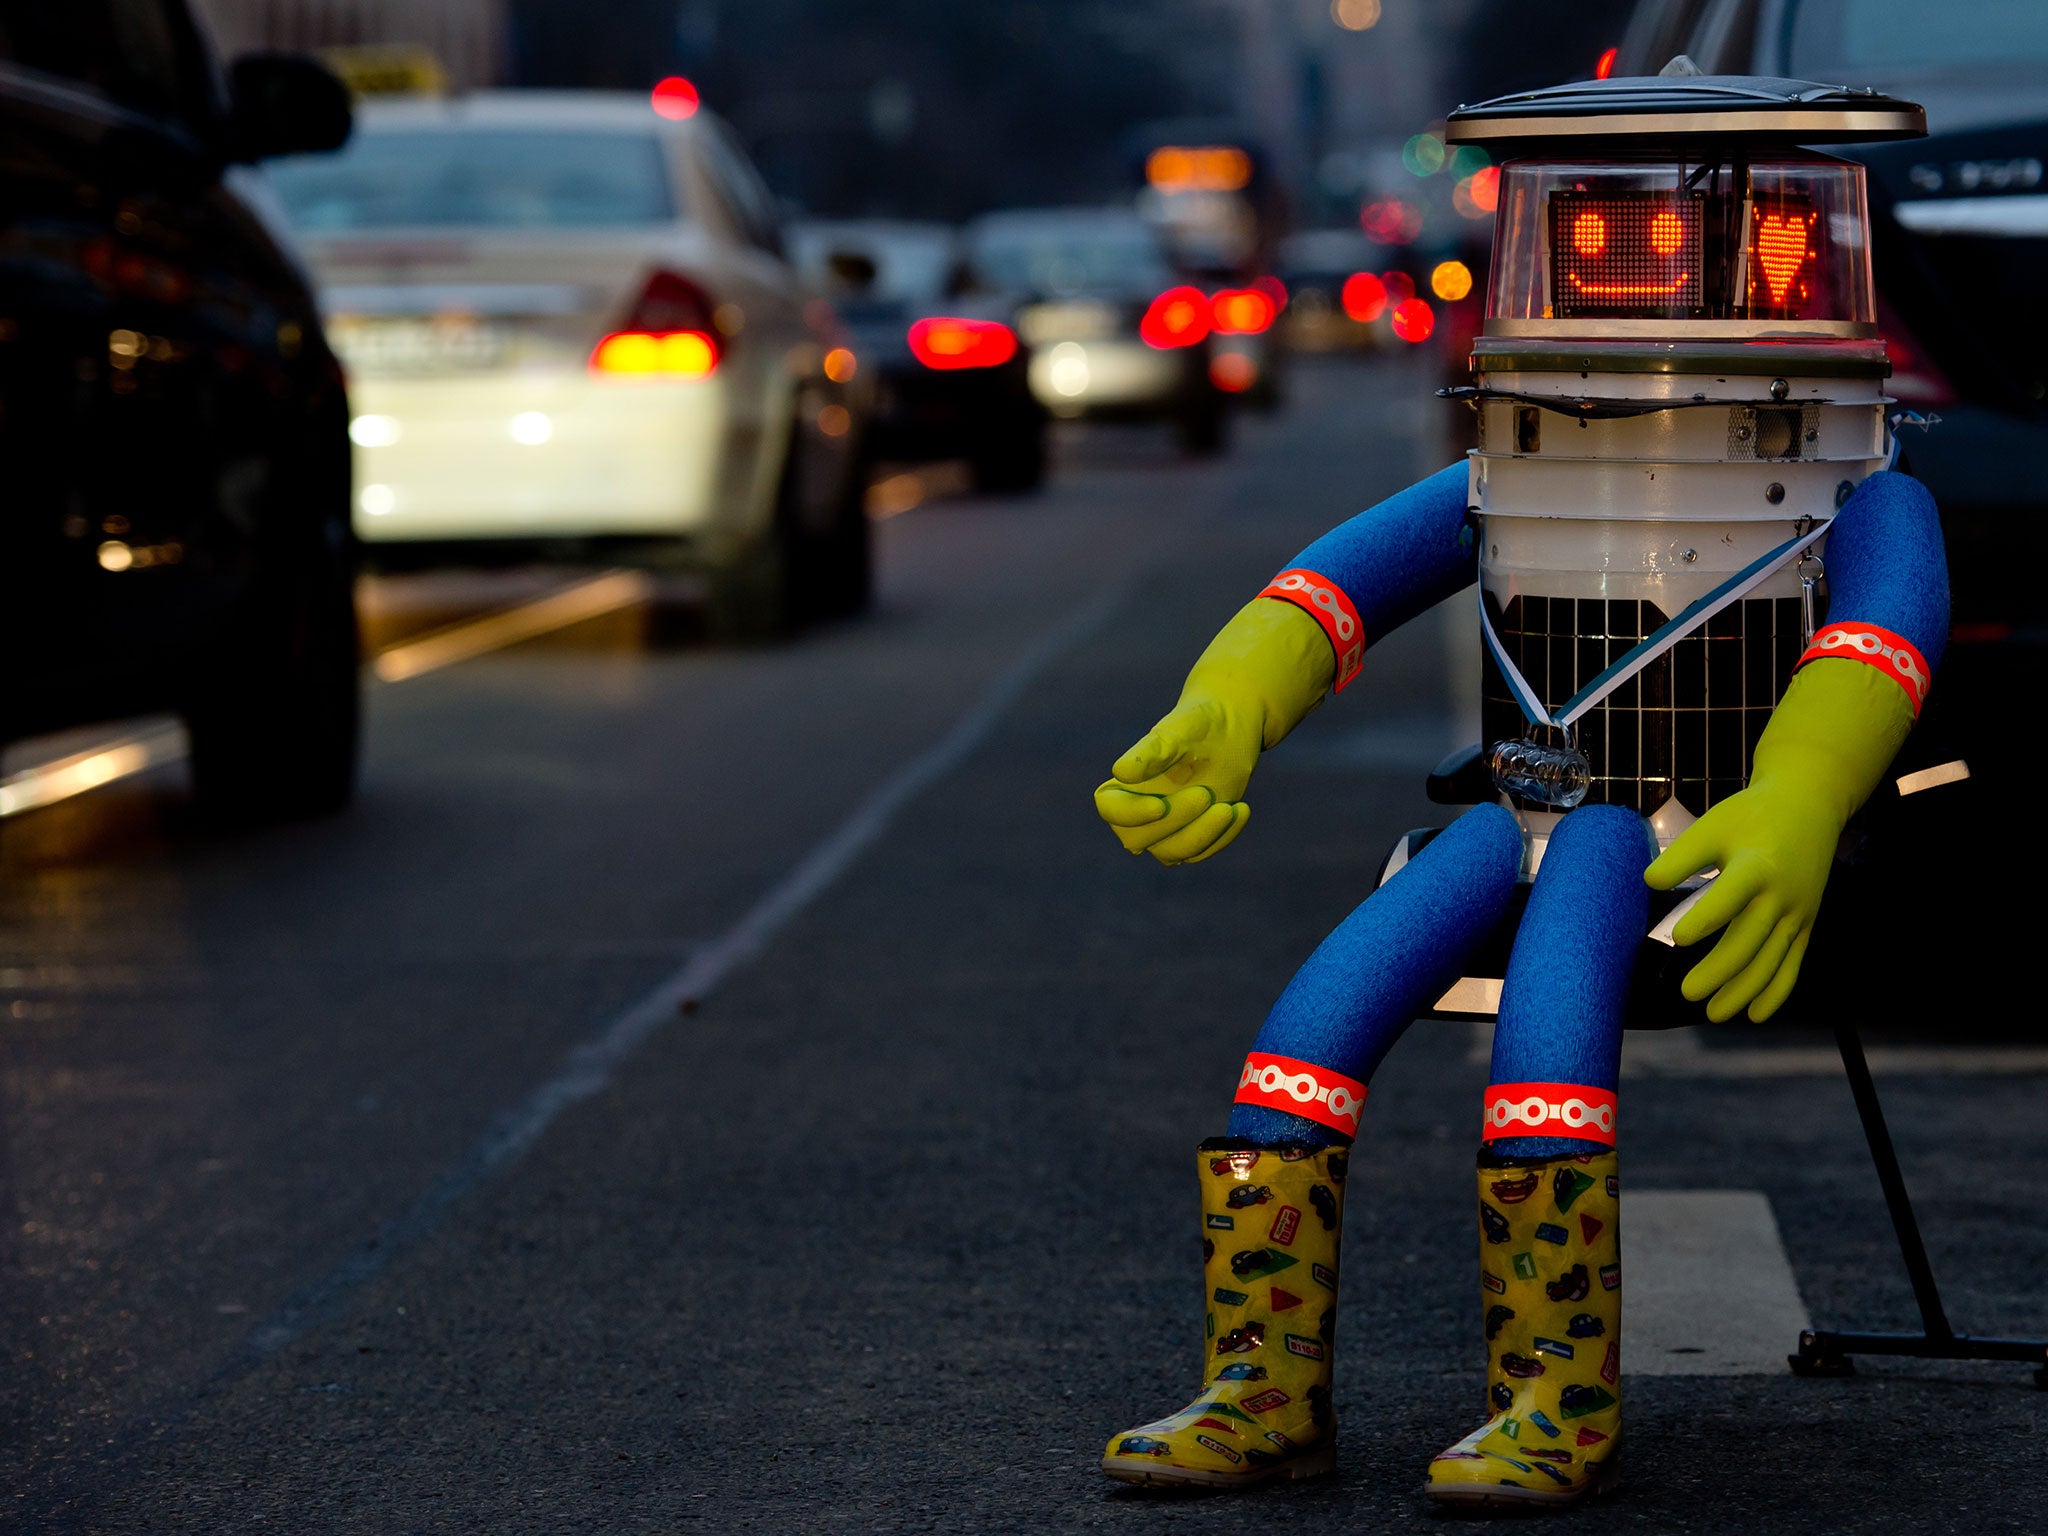 A robot called 'hitchBOT' sits on the side of a road and shows a smiling 'face' display